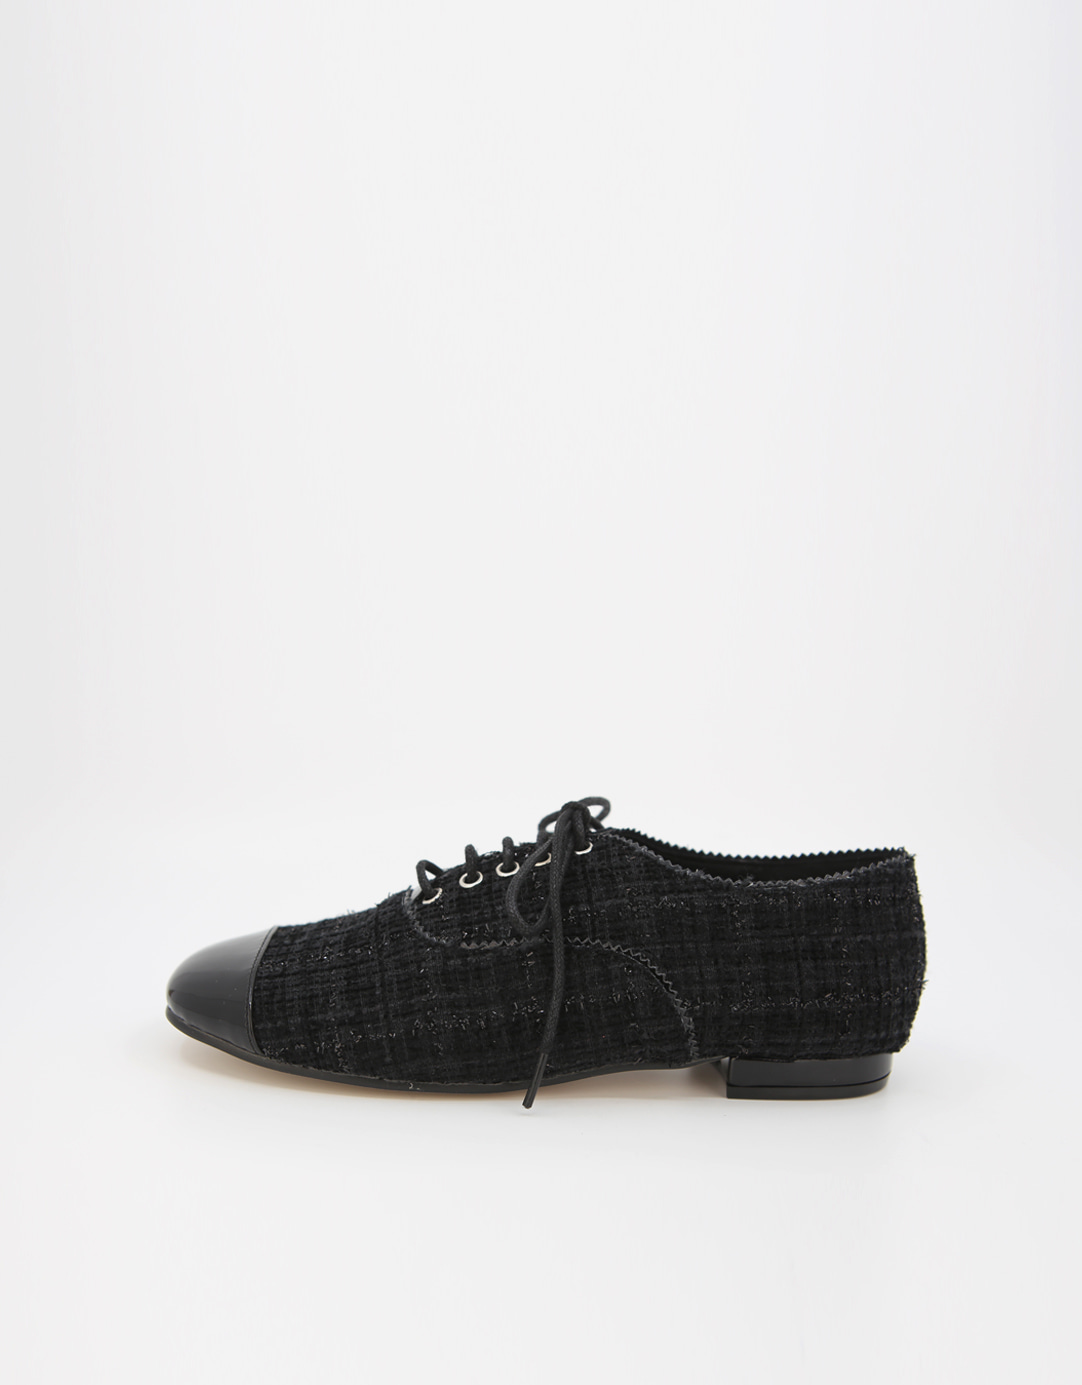 LACE UP TWEED LOAFER